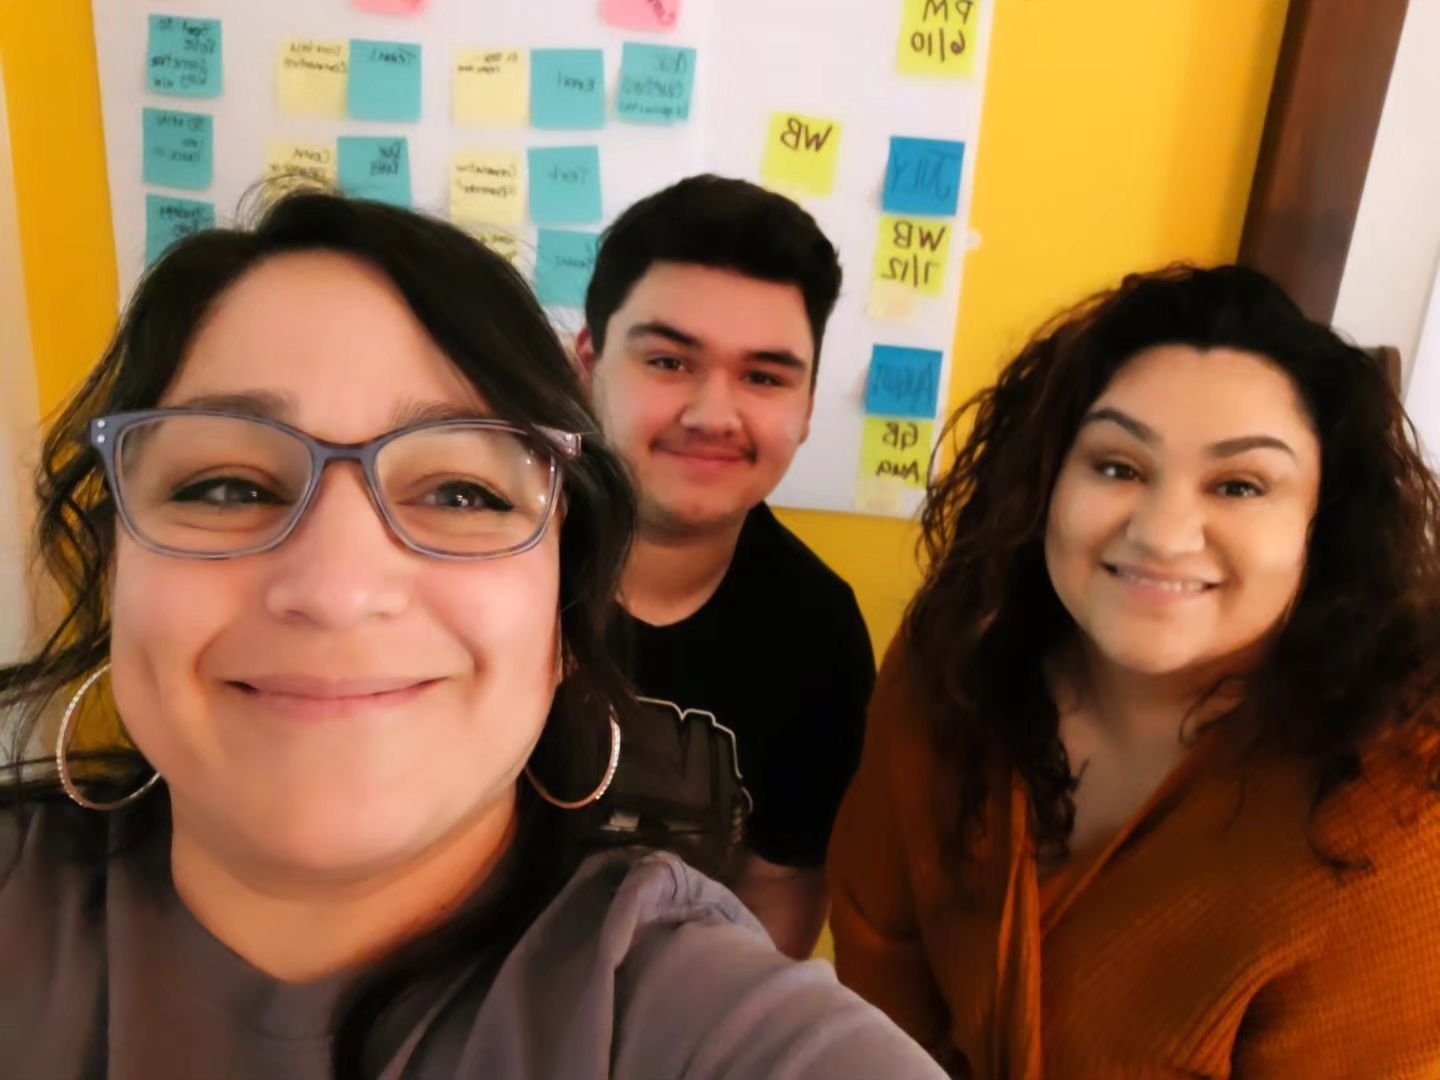 The Training Team is growing! We're working hard to make sure you get the best classes possible! Come level up with us!

Links in the bio!

Introducing:
Rosalinda Velasquez, Operations Manager. She's gonna help all the classes run smoothly. @rosavel2